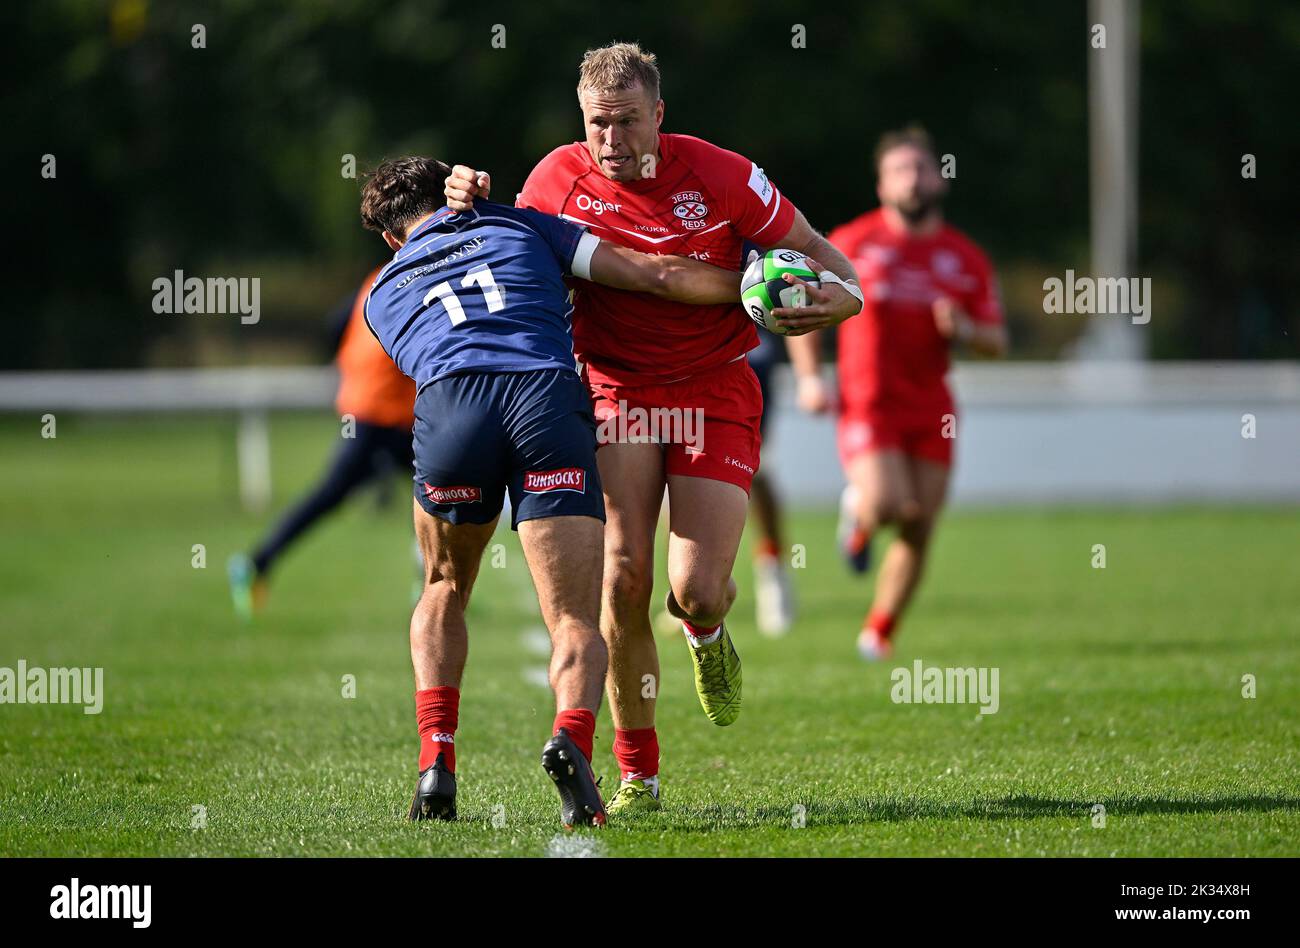 Richmond, United Kingdom. 24th Sep, 2022. Championship Rugby. London Scottish V Jersey Reds. The Richmond Athletic Ground. Richmond. Ben Woollett (Jersey Reds) tries to get past Josh Gillespie (London Scottish) during the London Scottish V Jersey Reds championship rugby match. Credit: Sport In Pictures/Alamy Live News Stock Photo